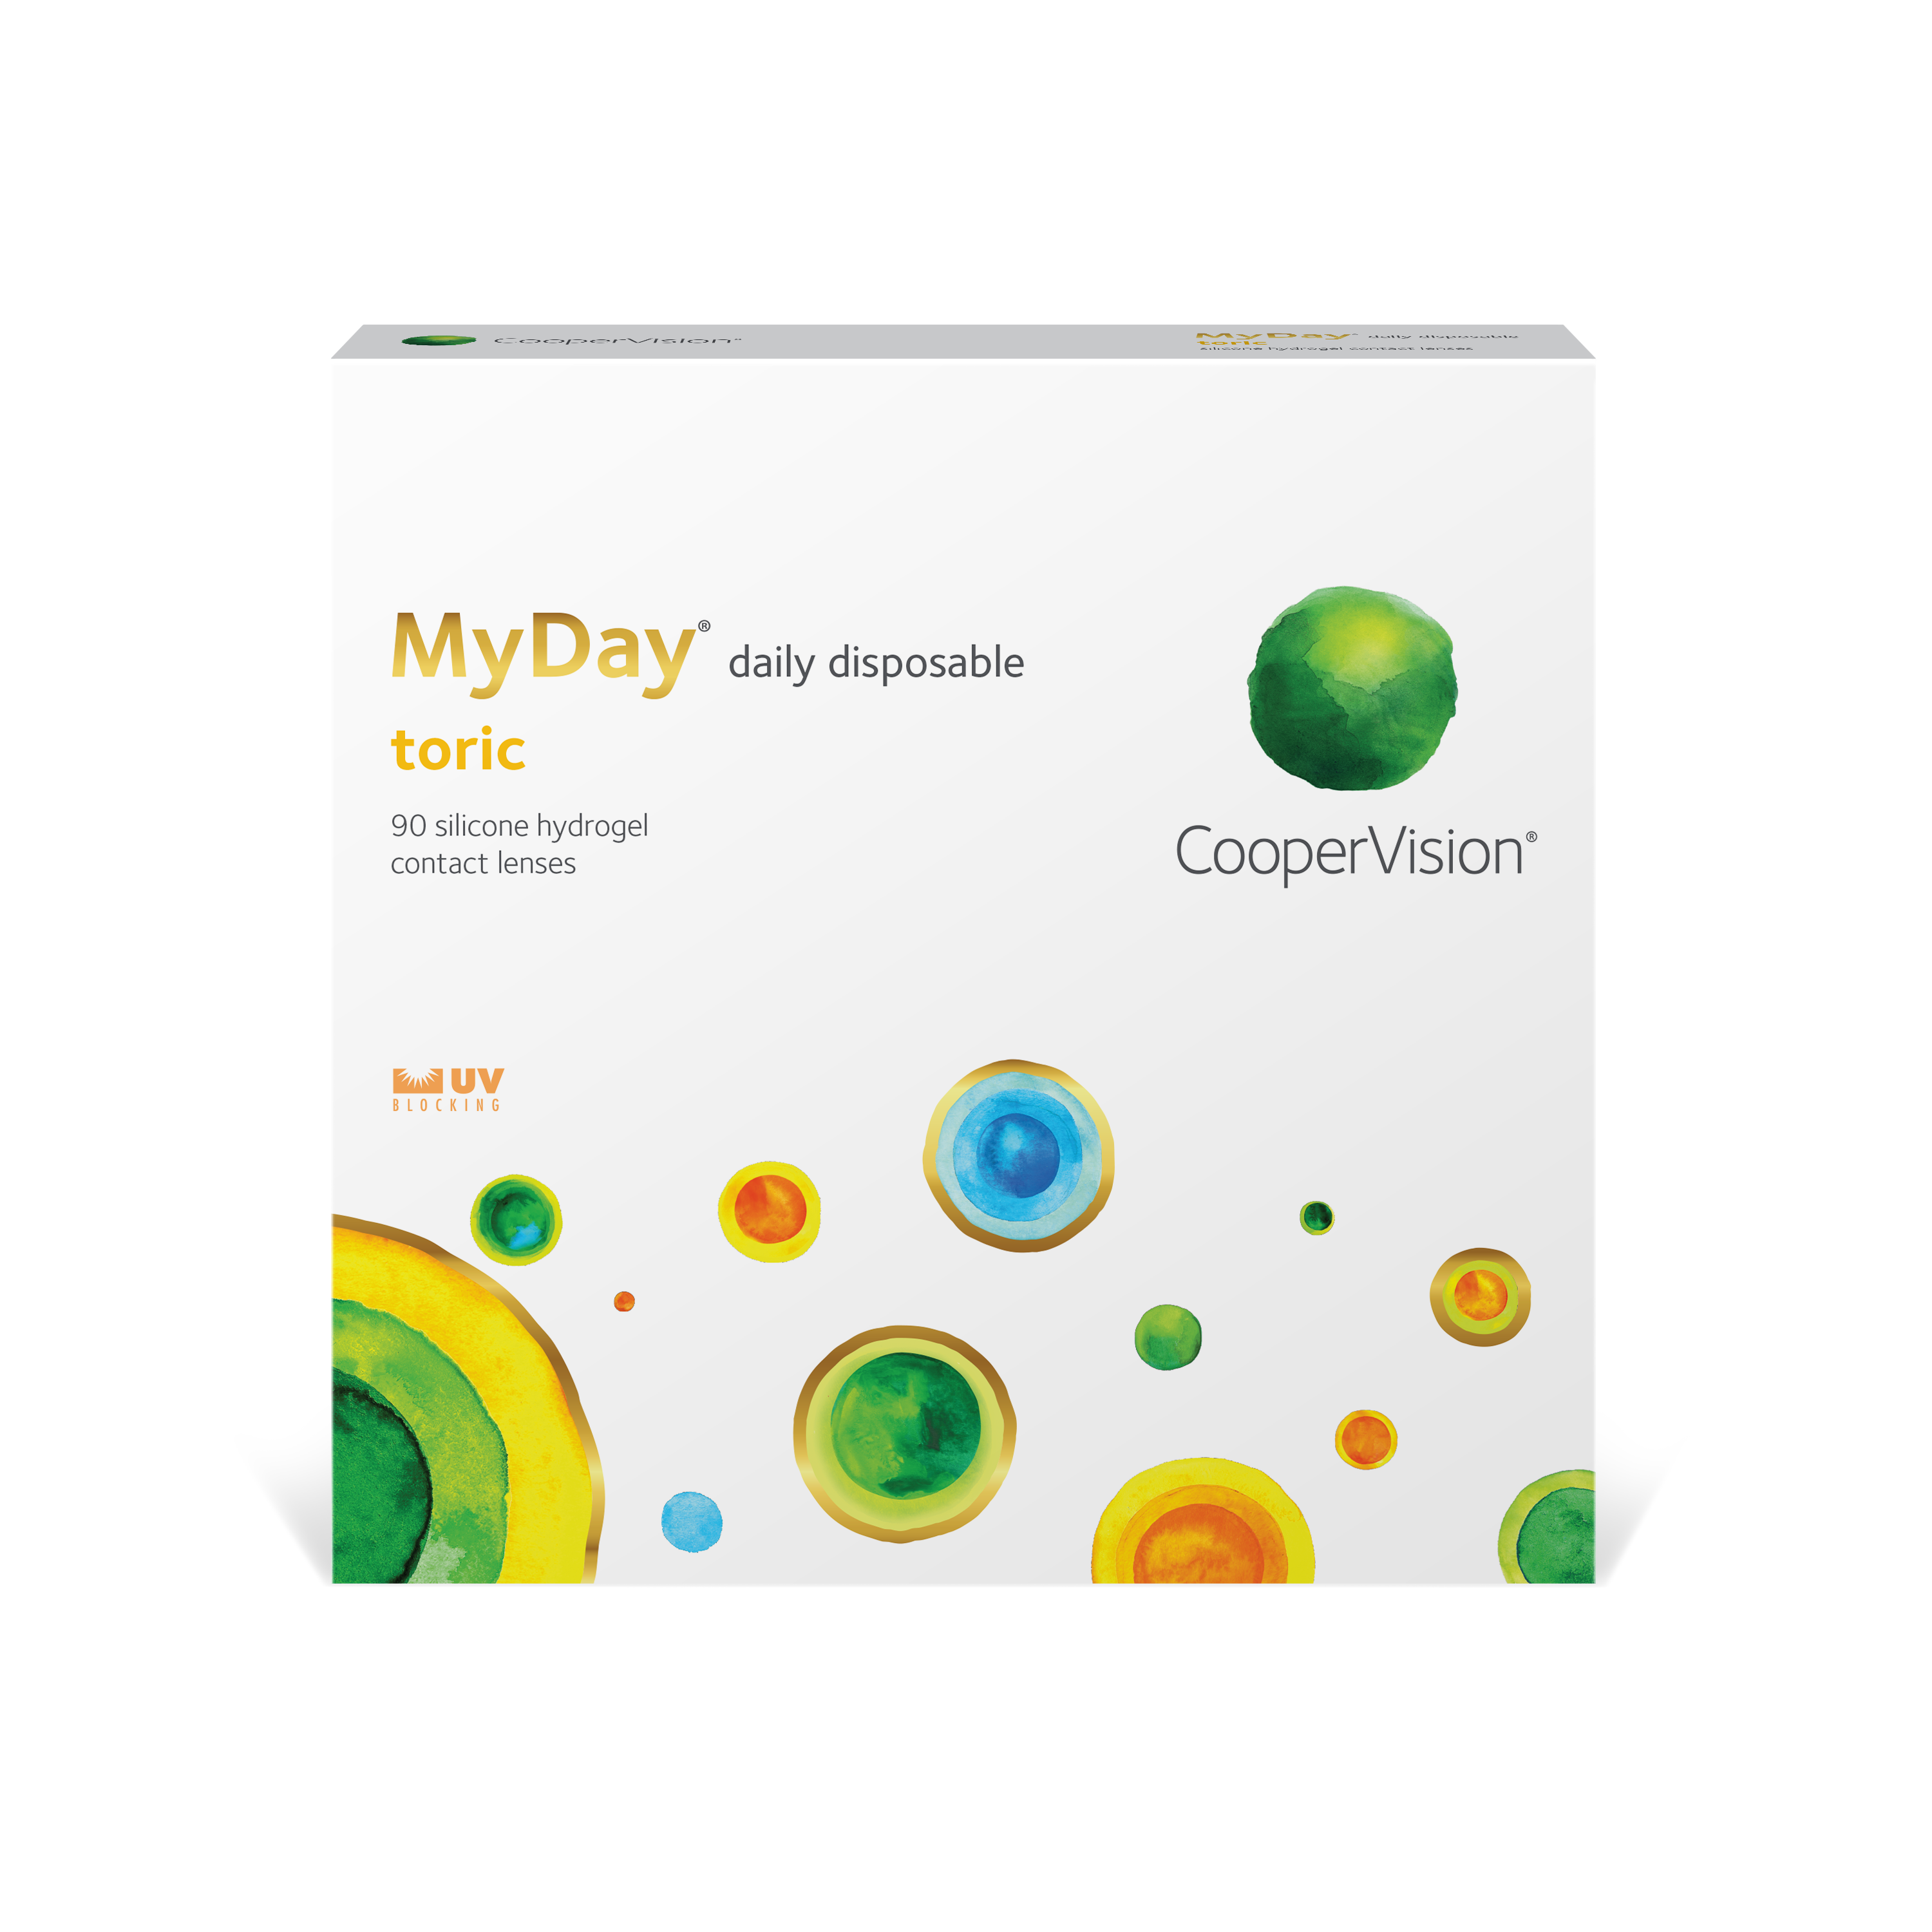 myday-daily-disposable-toric-coopervision